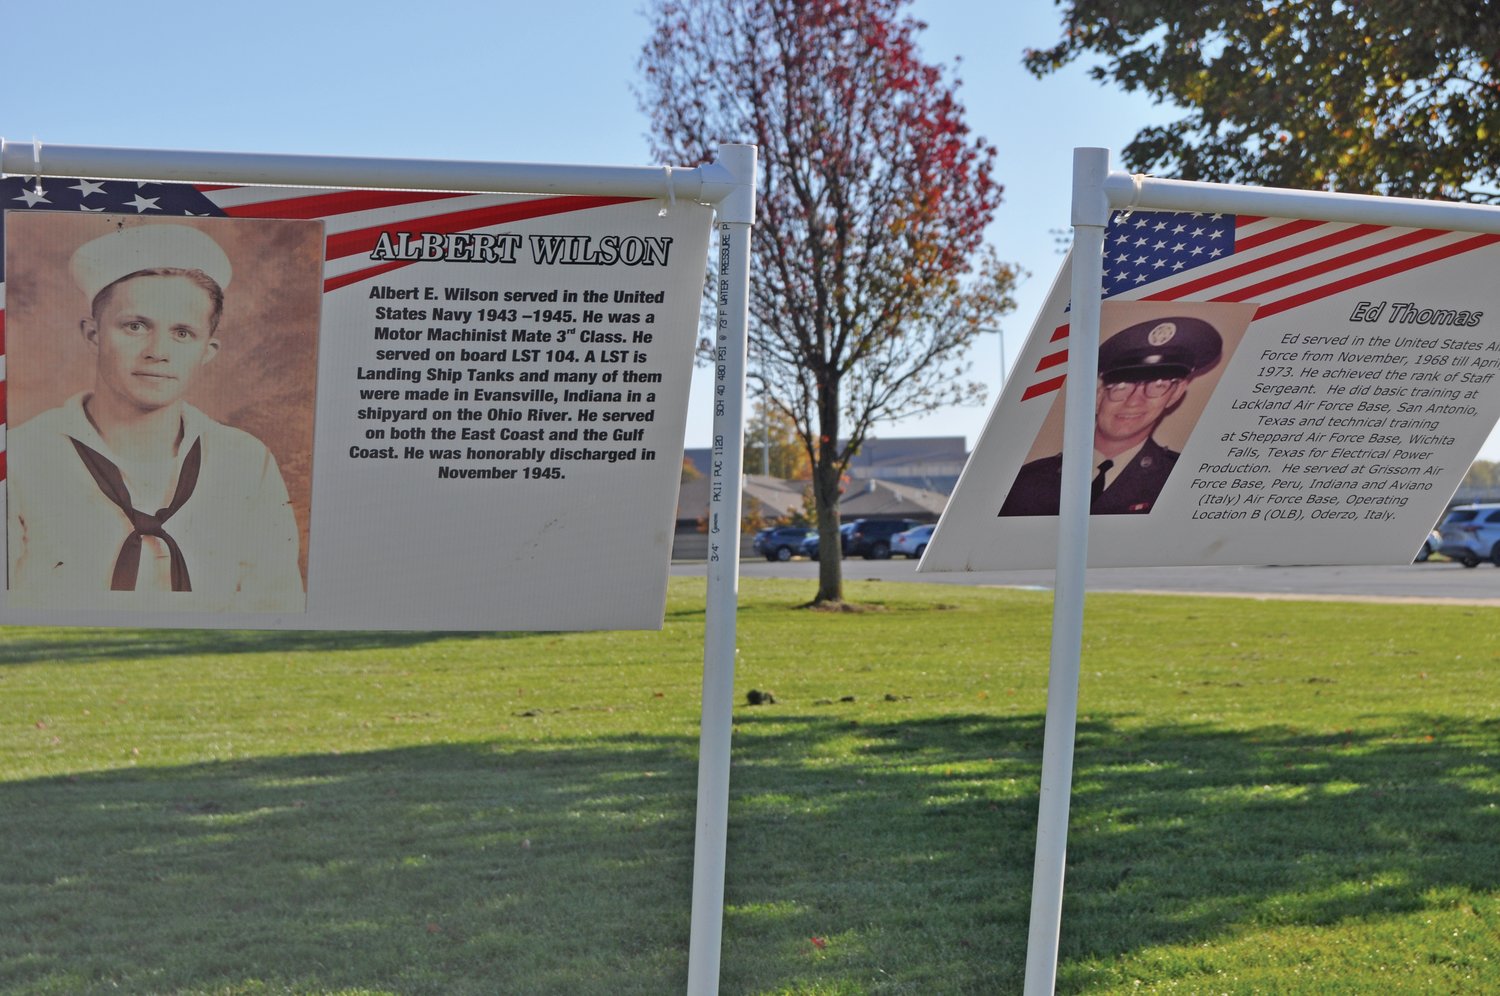 Information about local military veterans is featured in a drive-thru Veterans Day display at North Montgomery Middle School. The display is the same one used for community events in Waynetown. It’s just one way Montgomery County is commemorating the holiday. The county’s annual Veterans Day service is scheduled for 11 a.m. Thursday at Marie Canine Plaza. At that same time in Linden, Marvin Swick plans to walk with an American flag along the streets and invites anyone to join him.